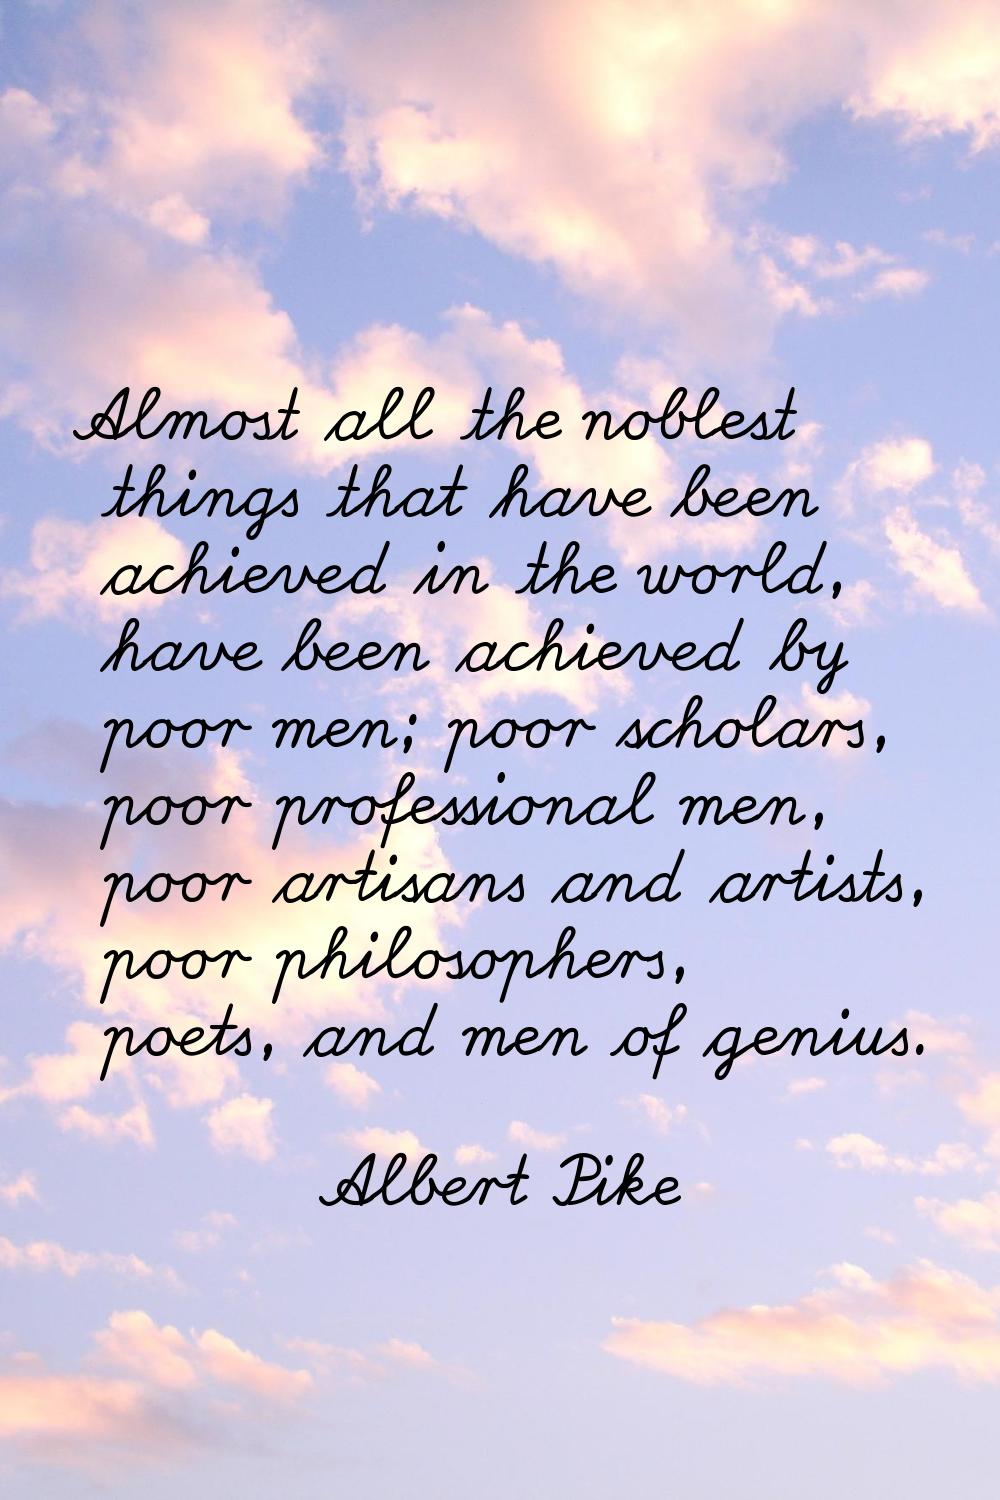 Almost all the noblest things that have been achieved in the world, have been achieved by poor men;